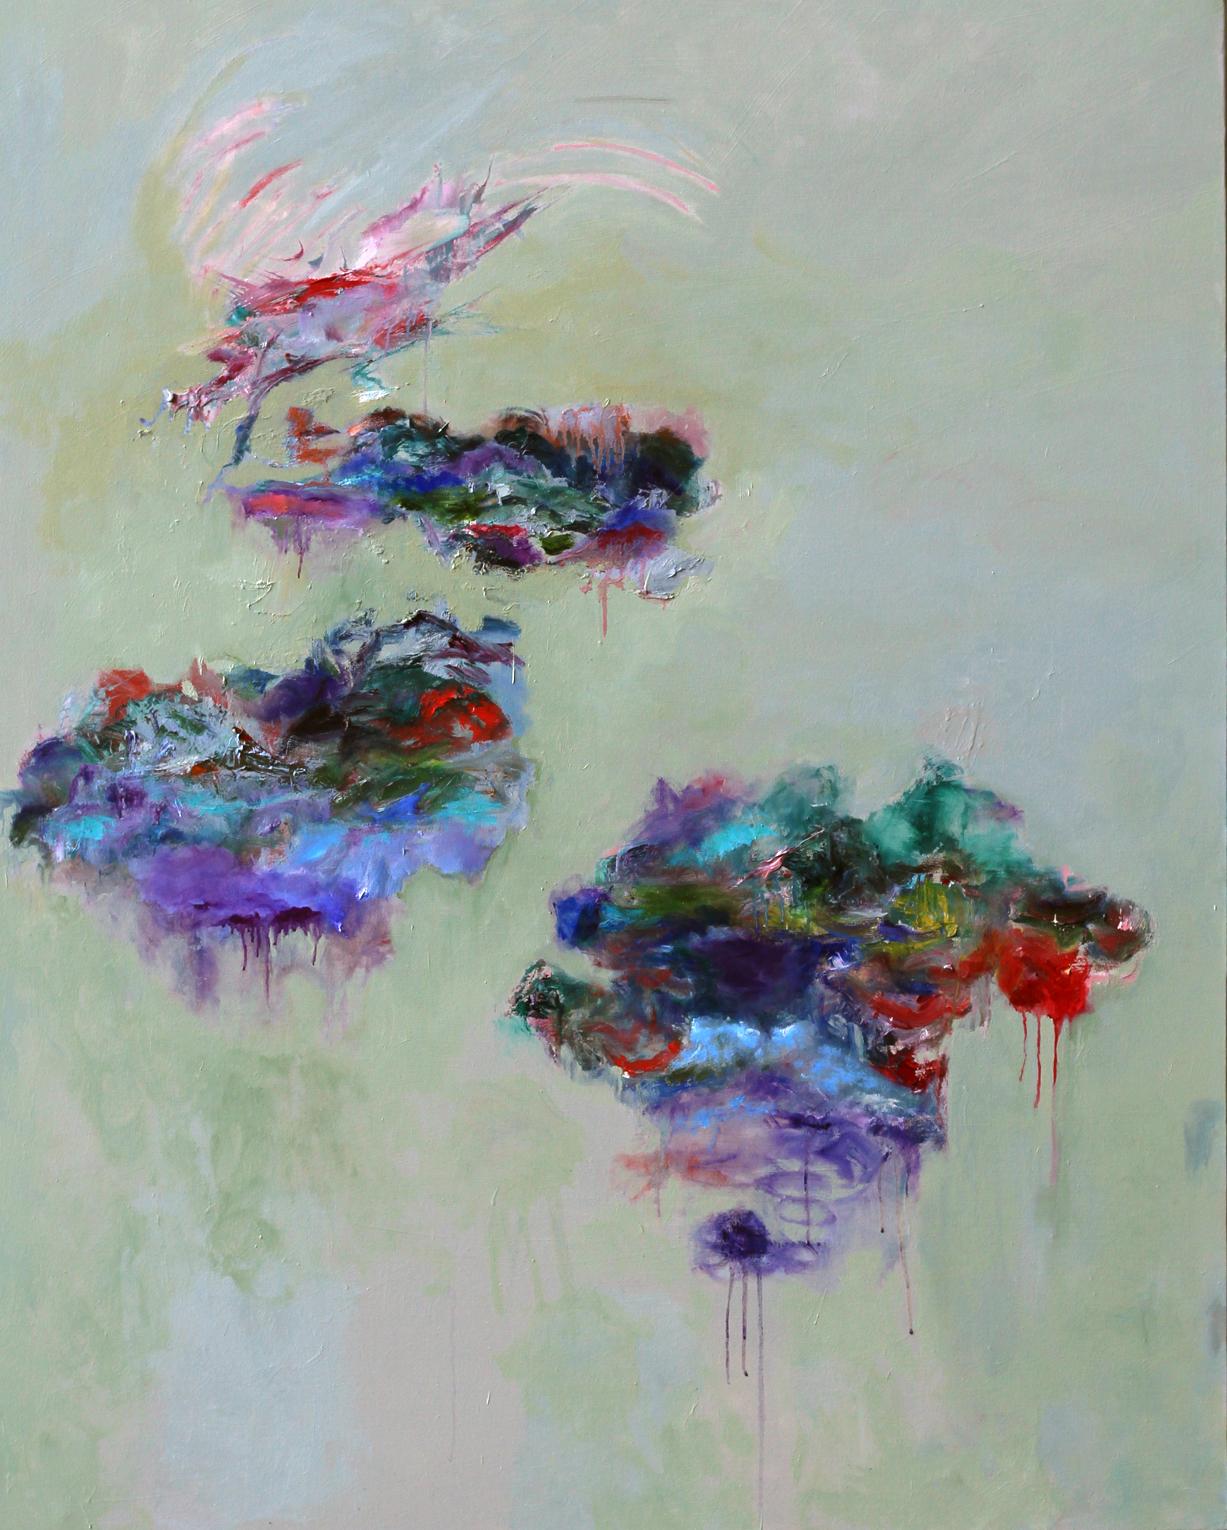 "Personal Voyage", abstract, blue, red, purple, green, oil painting - Painting by Katherine Borkowski-Byrne